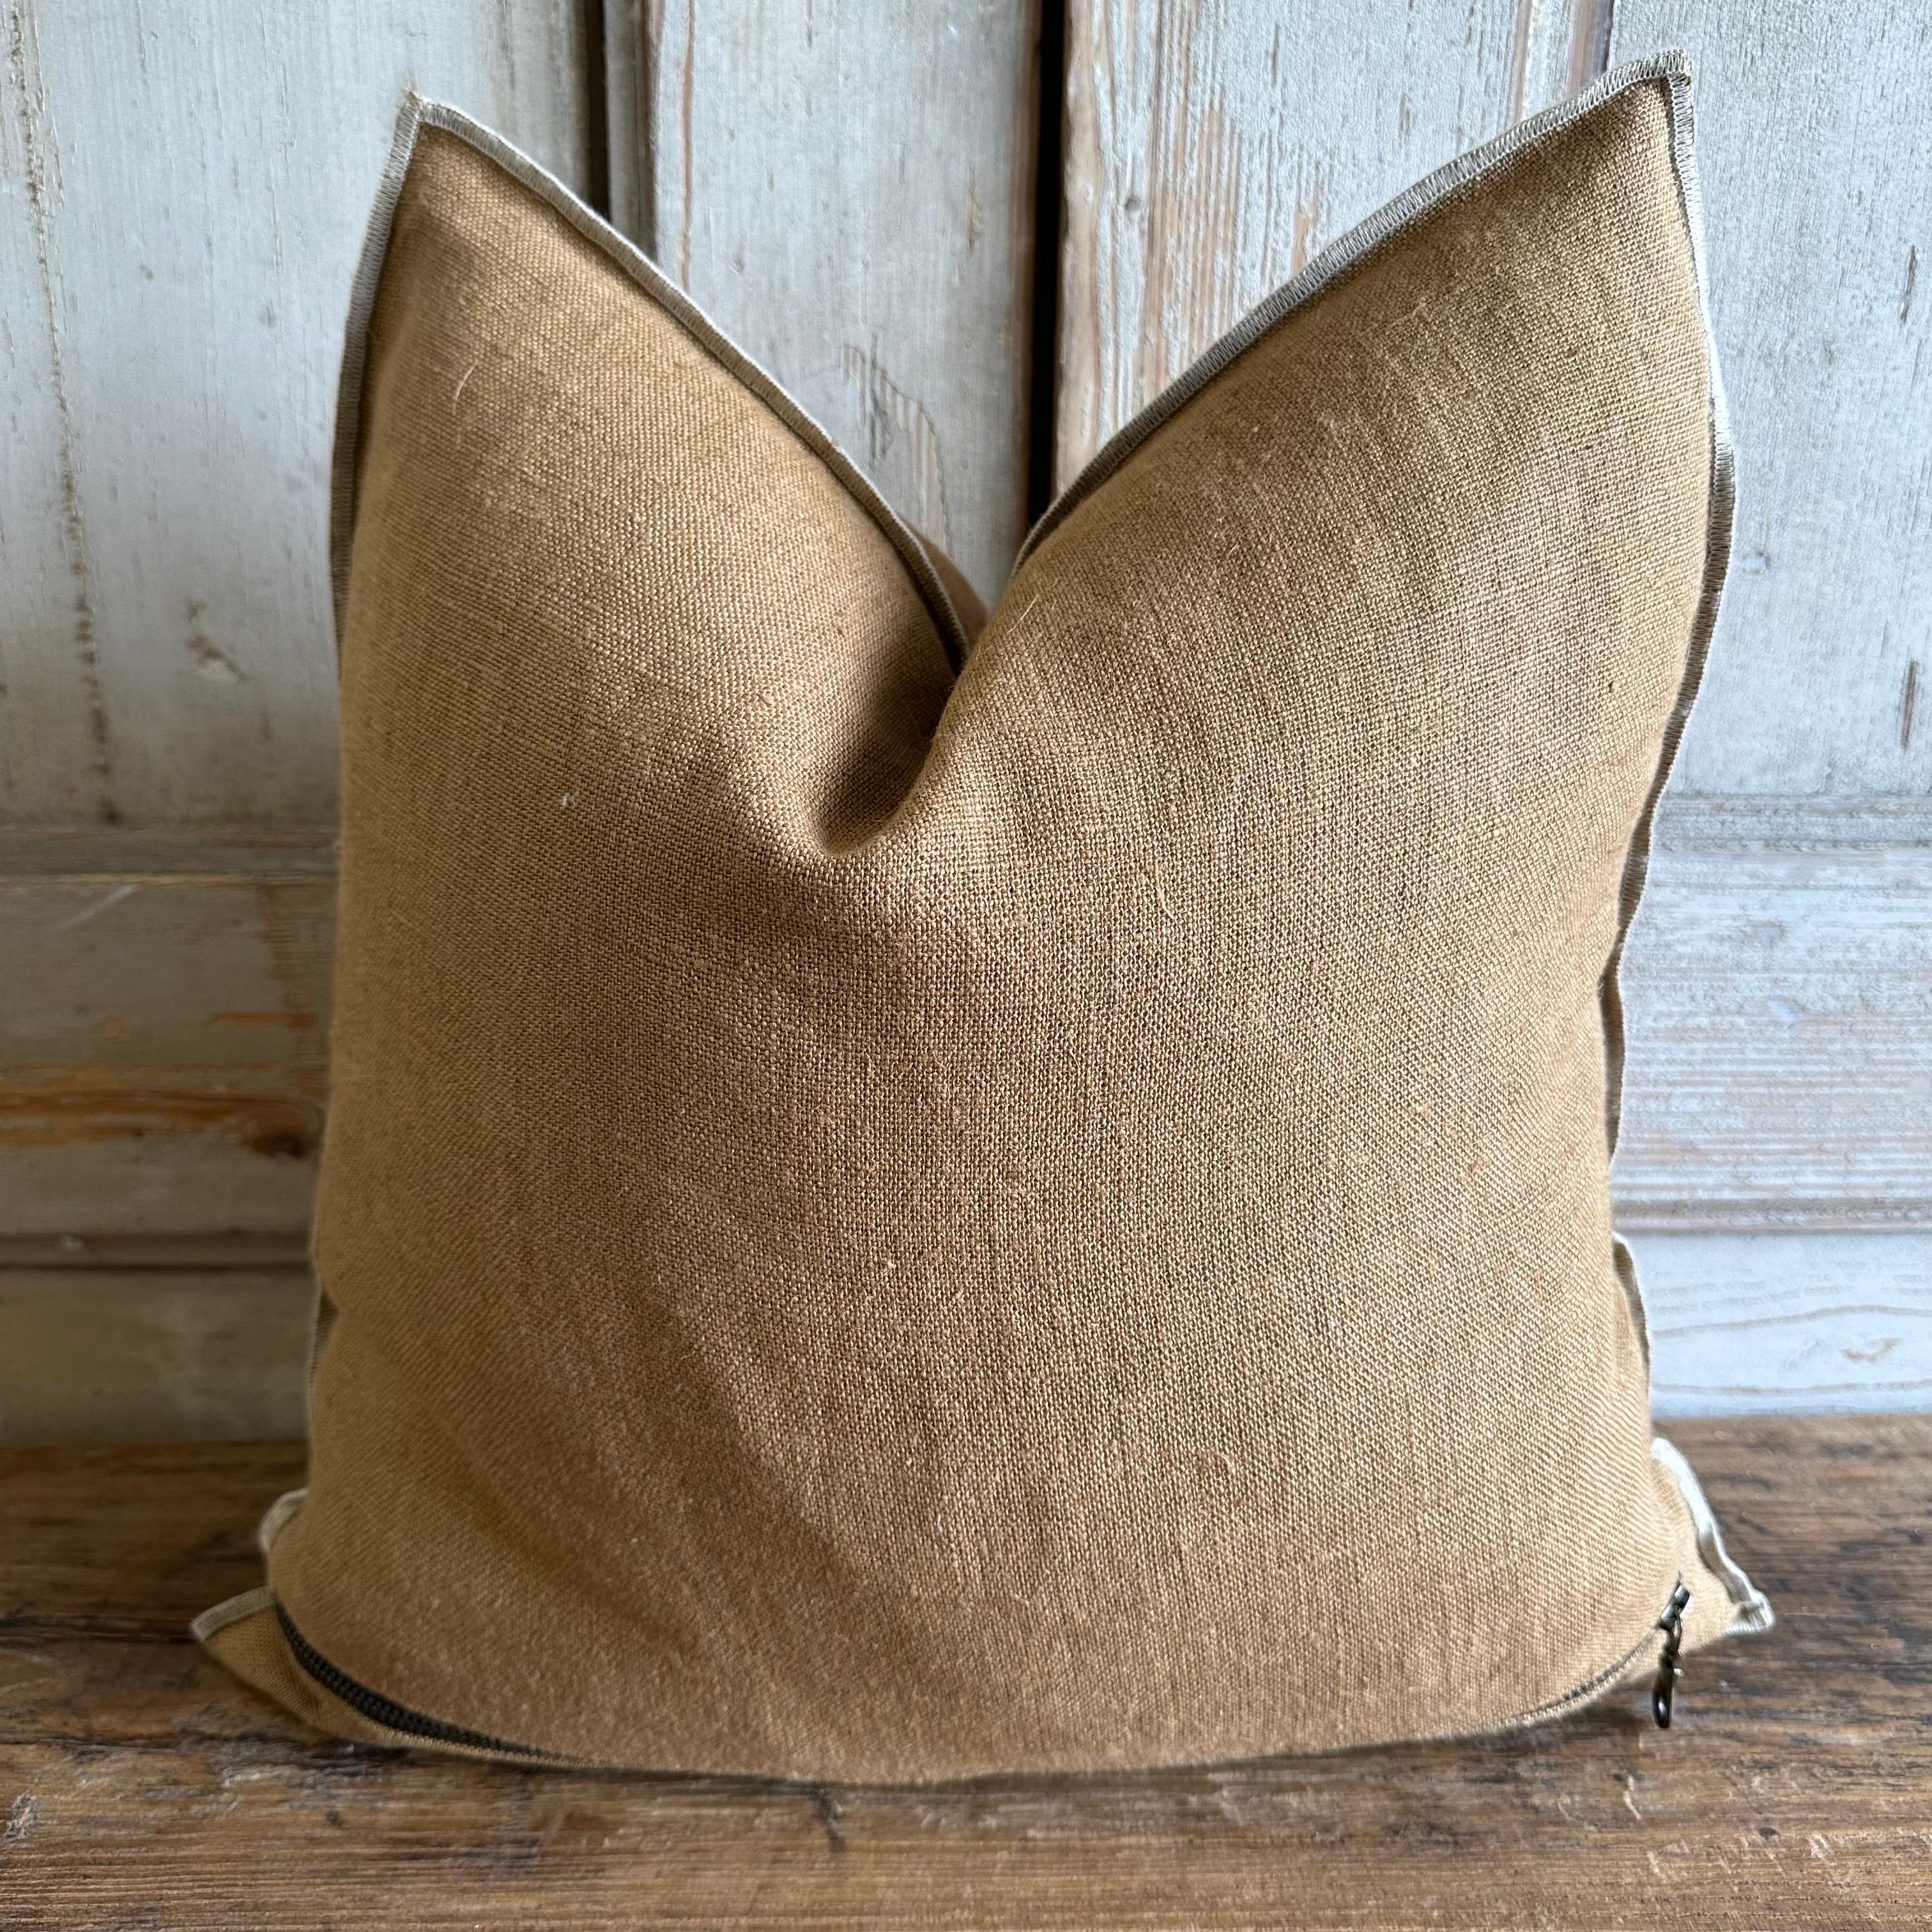 A beautiful 100% linen pillow with decorative stitched edge. 
Zipper closure, 90/10 down feather pillow is included.
Size: 18x18
Color: Tabac
Composition
100% linen, natural finish, european flax label
A beautiful accent pillow that is perfect